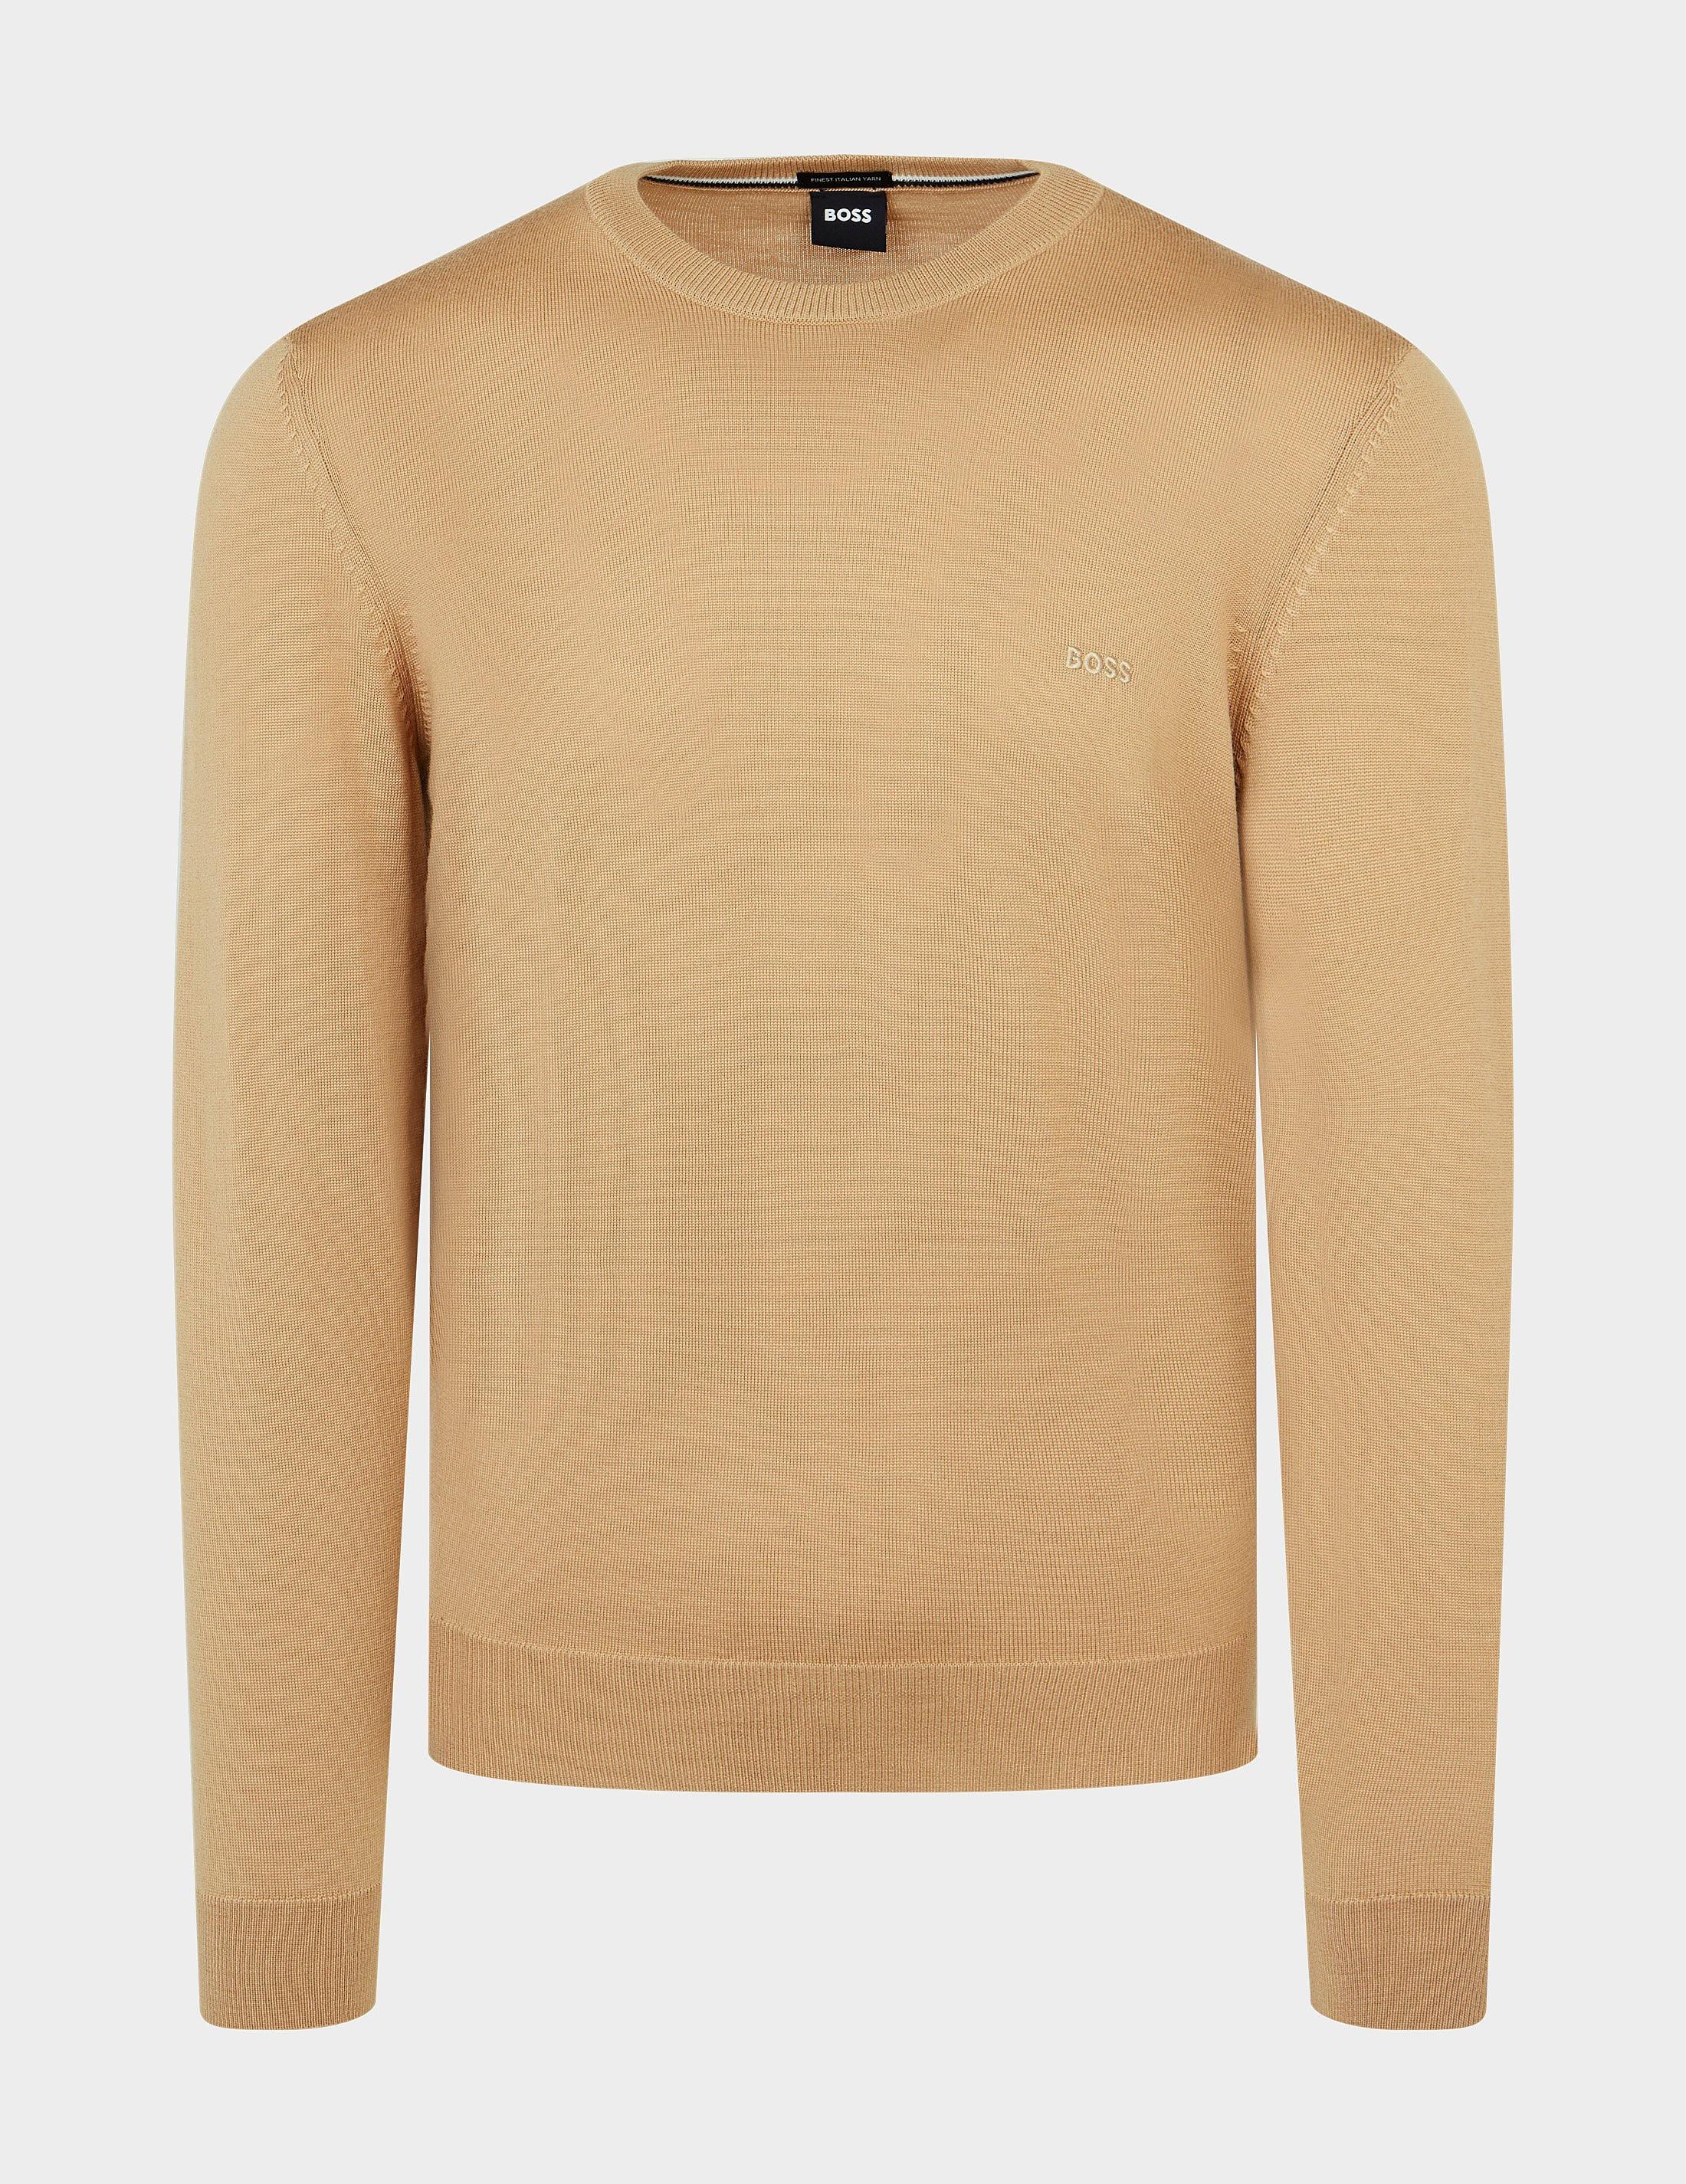 BOSS by HUGO BOSS Botto Knitted Jumper in Natural for Men | Lyst